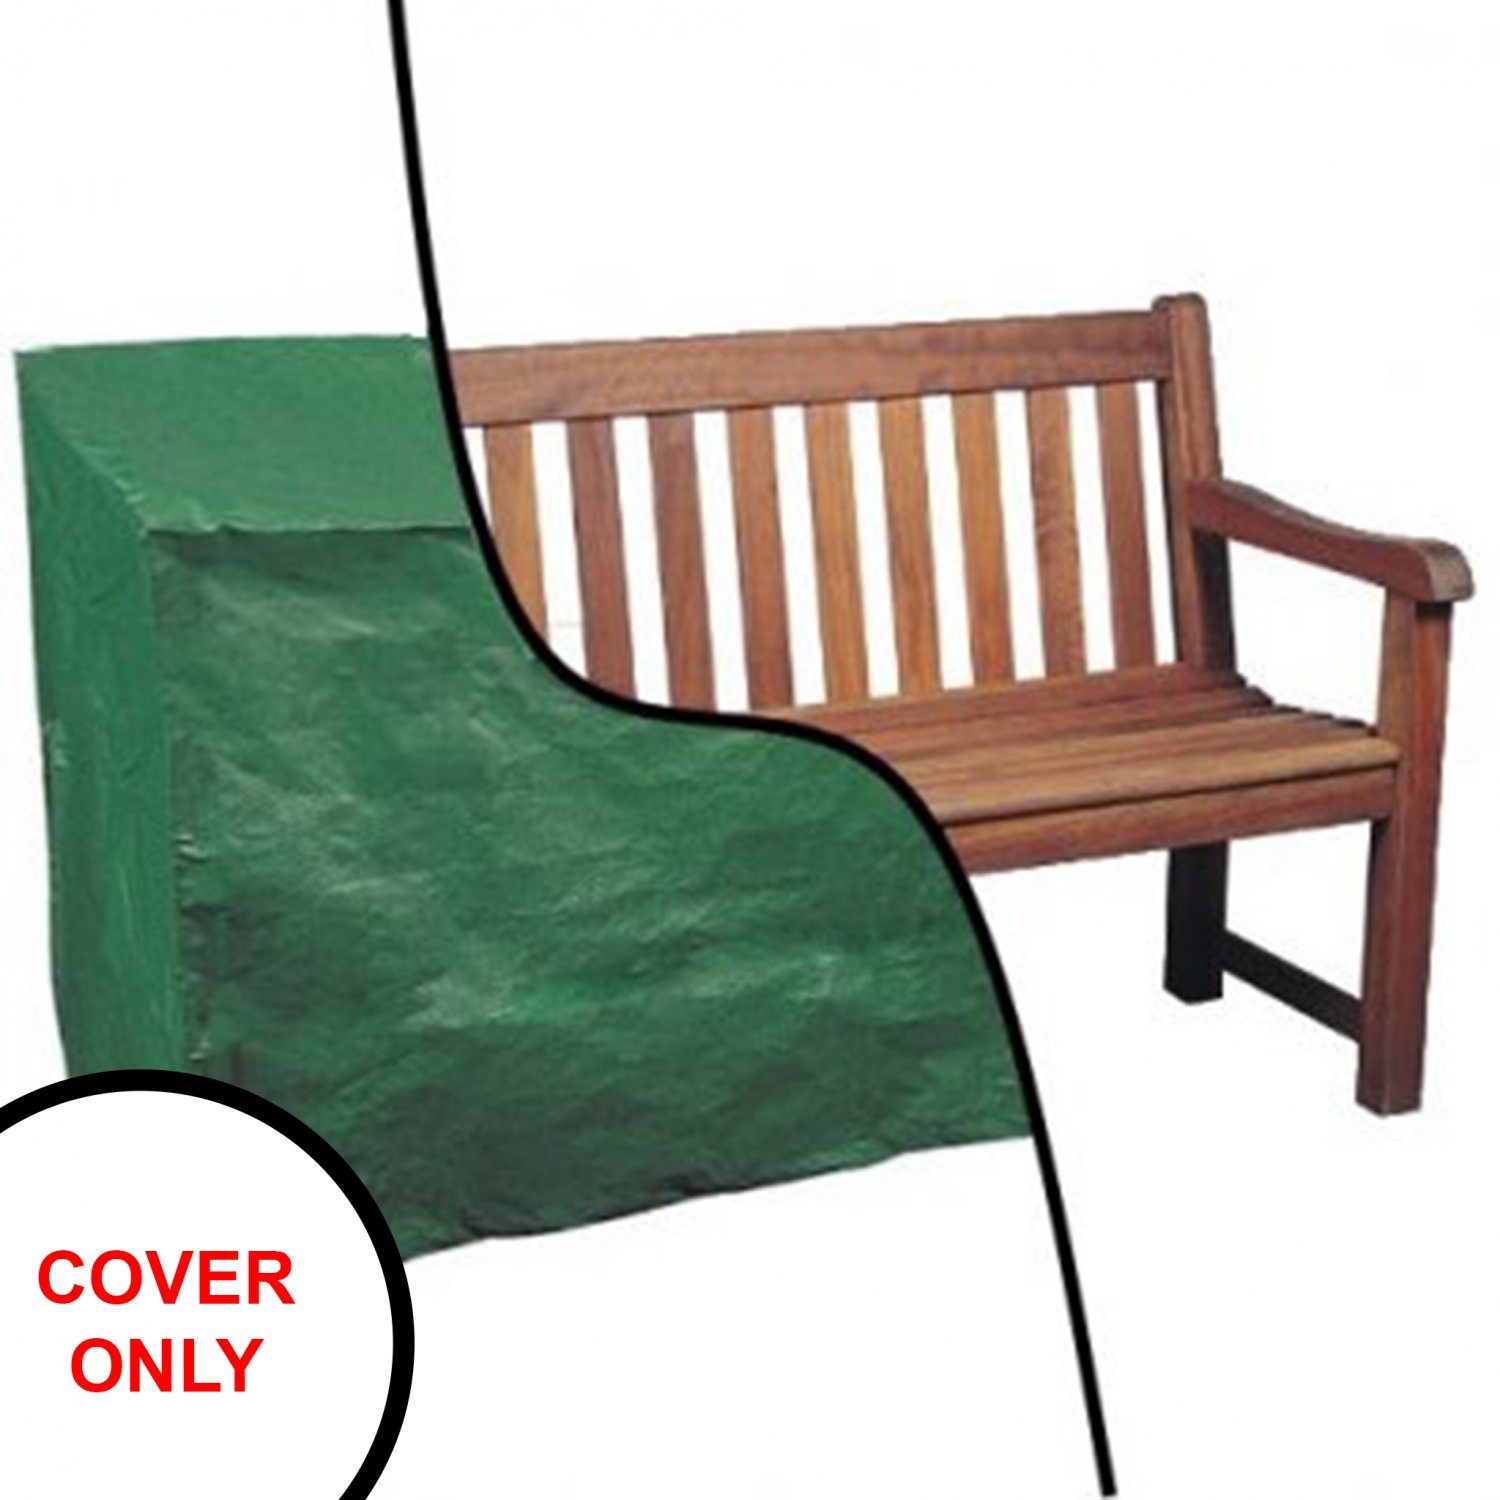 Waterproof 4ft 1.2m Garden Furniture 2 Seater Bench Seat Cover - Click Image to Close